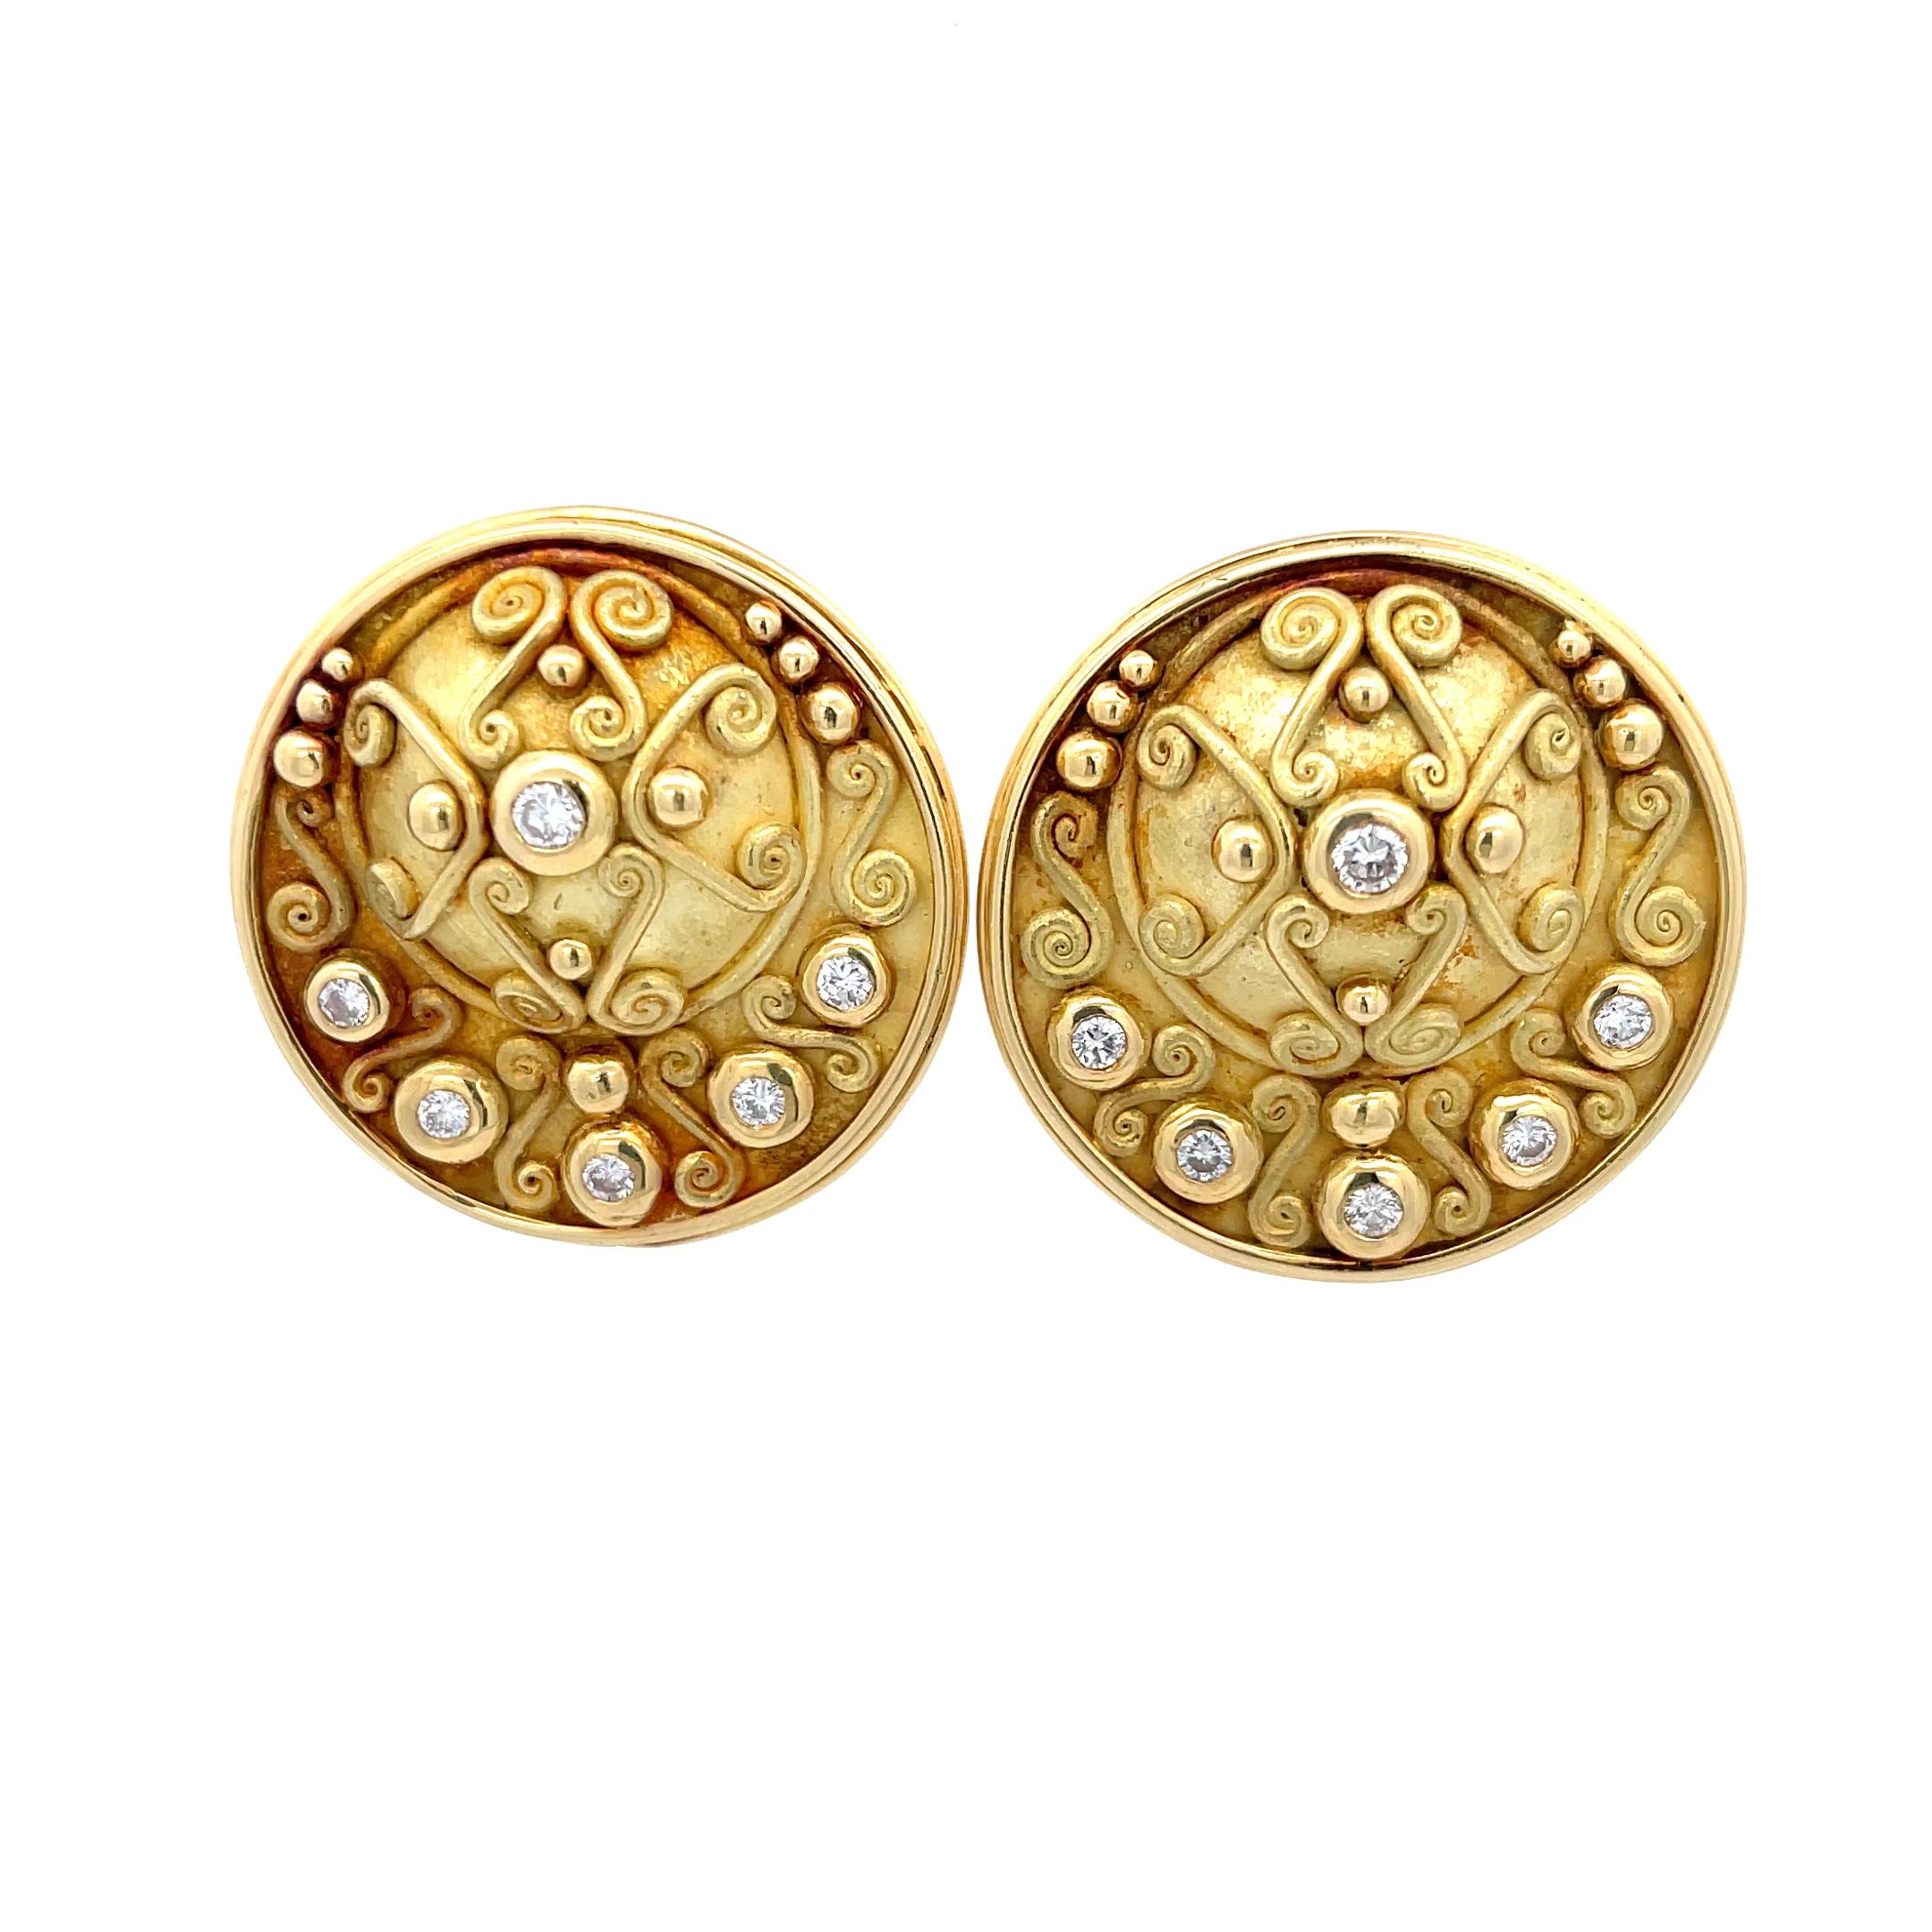 Denise Roberge Diamond Disc Earrings 18K Yellow Gold In Good Condition For Sale In Dallas, TX